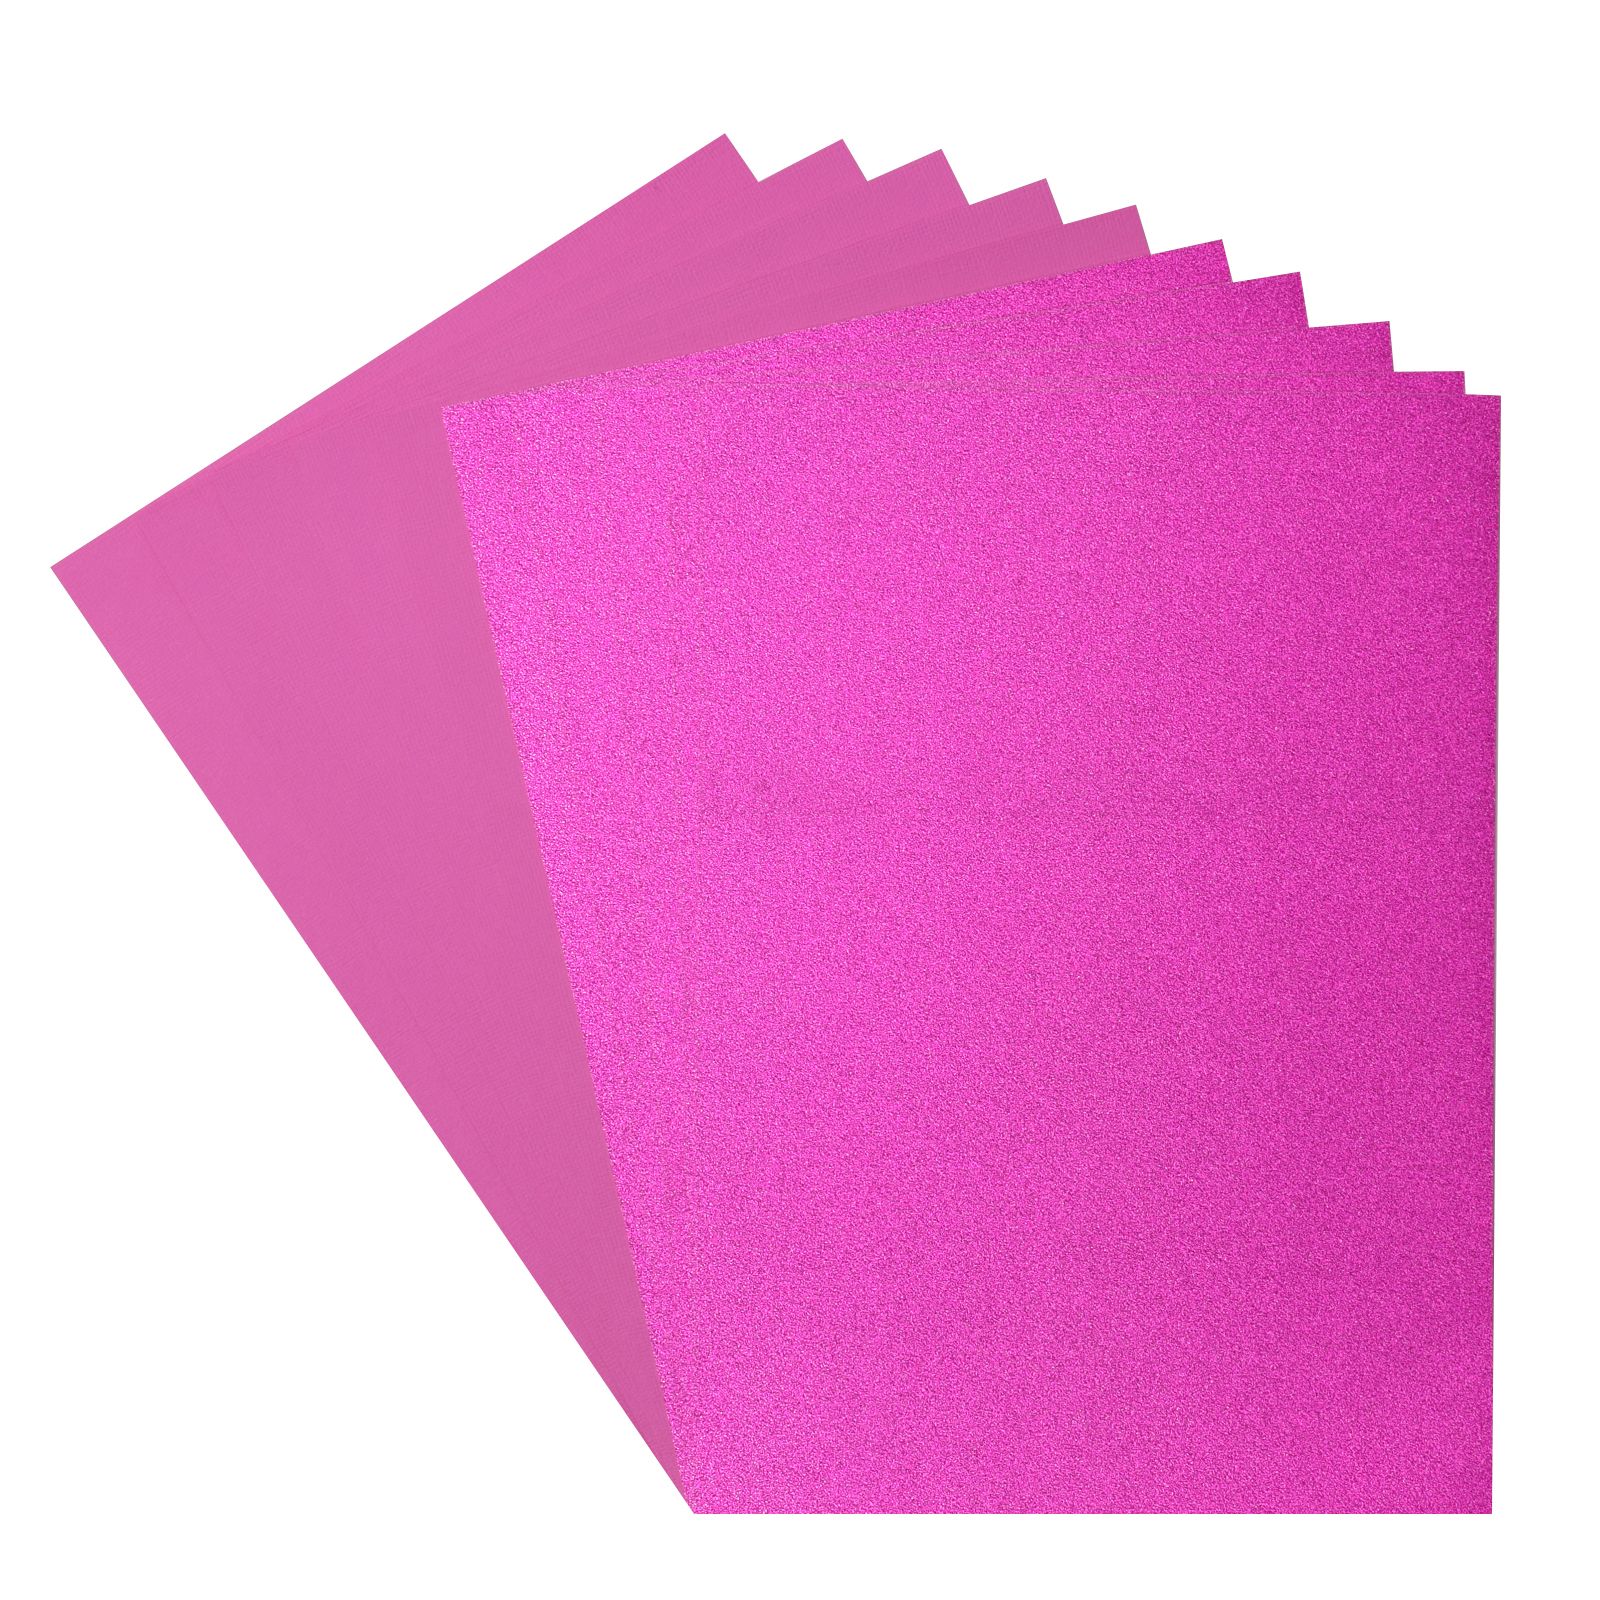 Florence • Glitter Paper and Cardstock Set 216g A4 10x Pink/Fuchsia